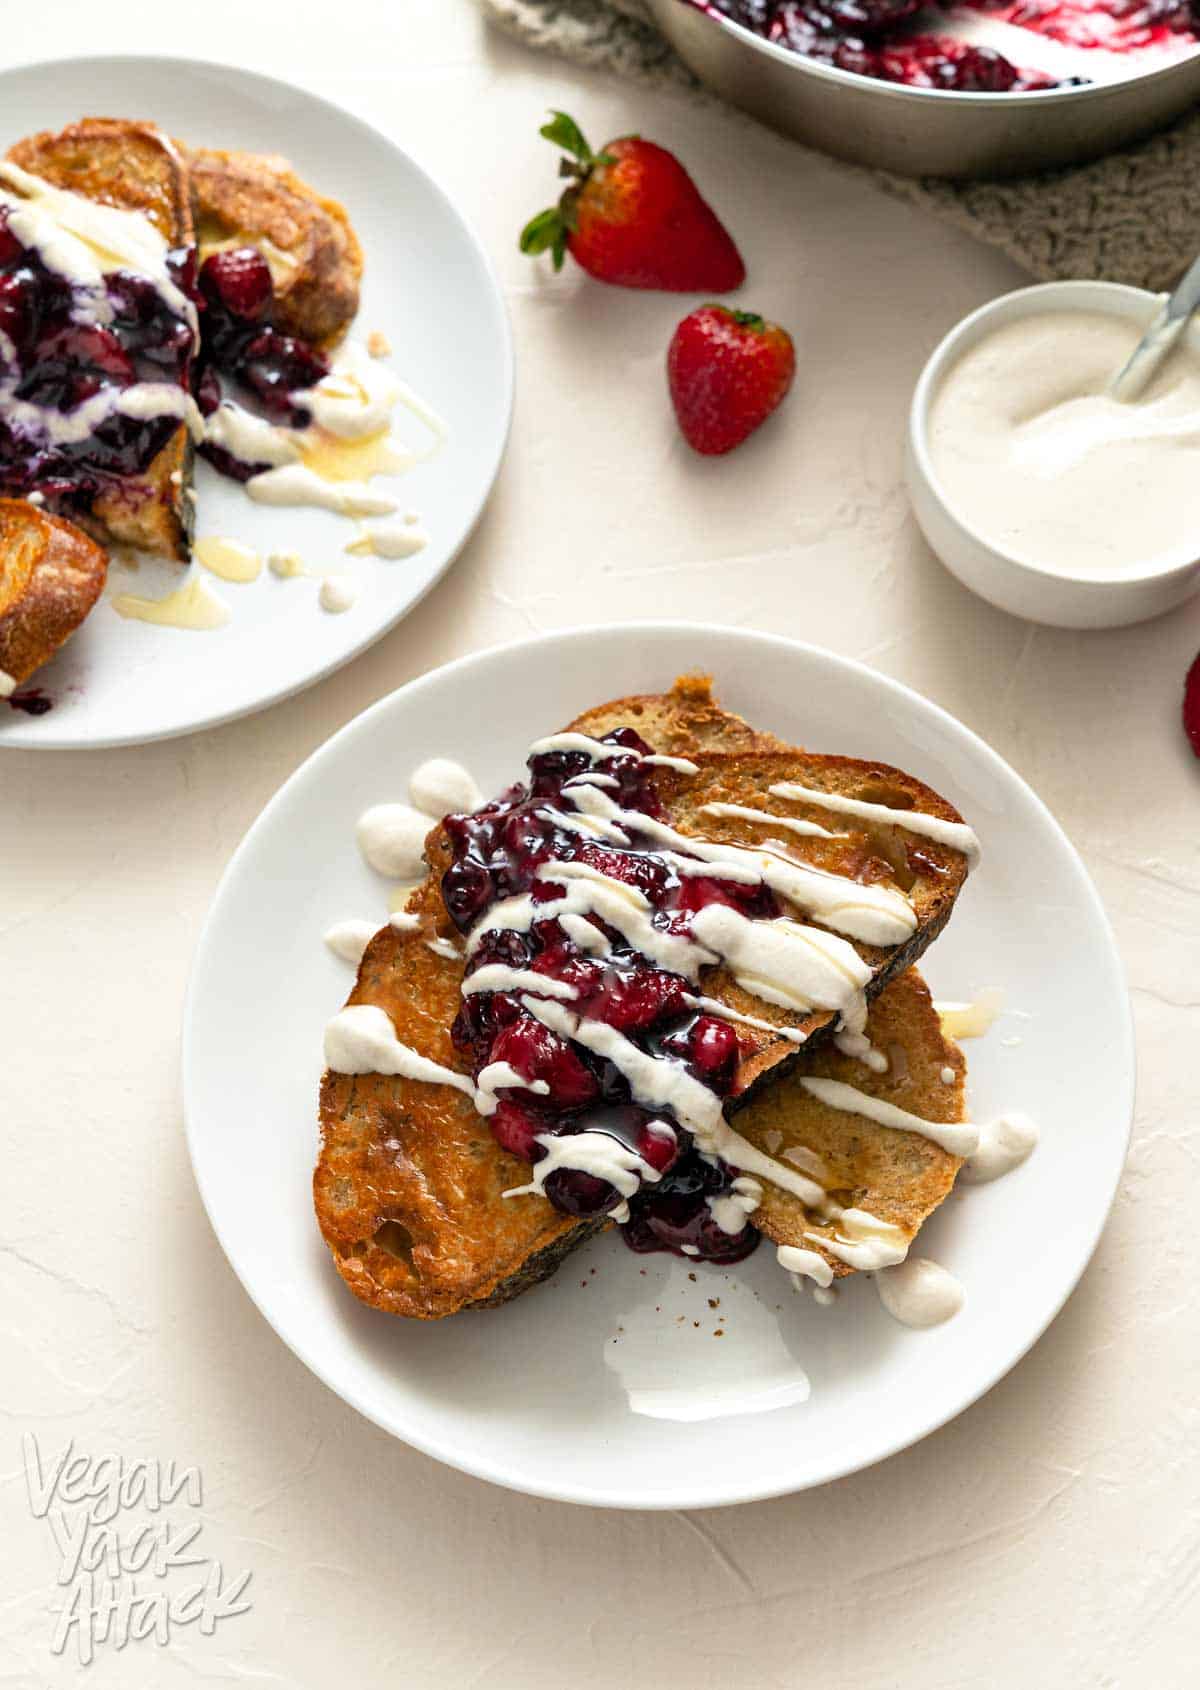 Image of two plates of berry sourdough French toast on an off-white background with cream sauce